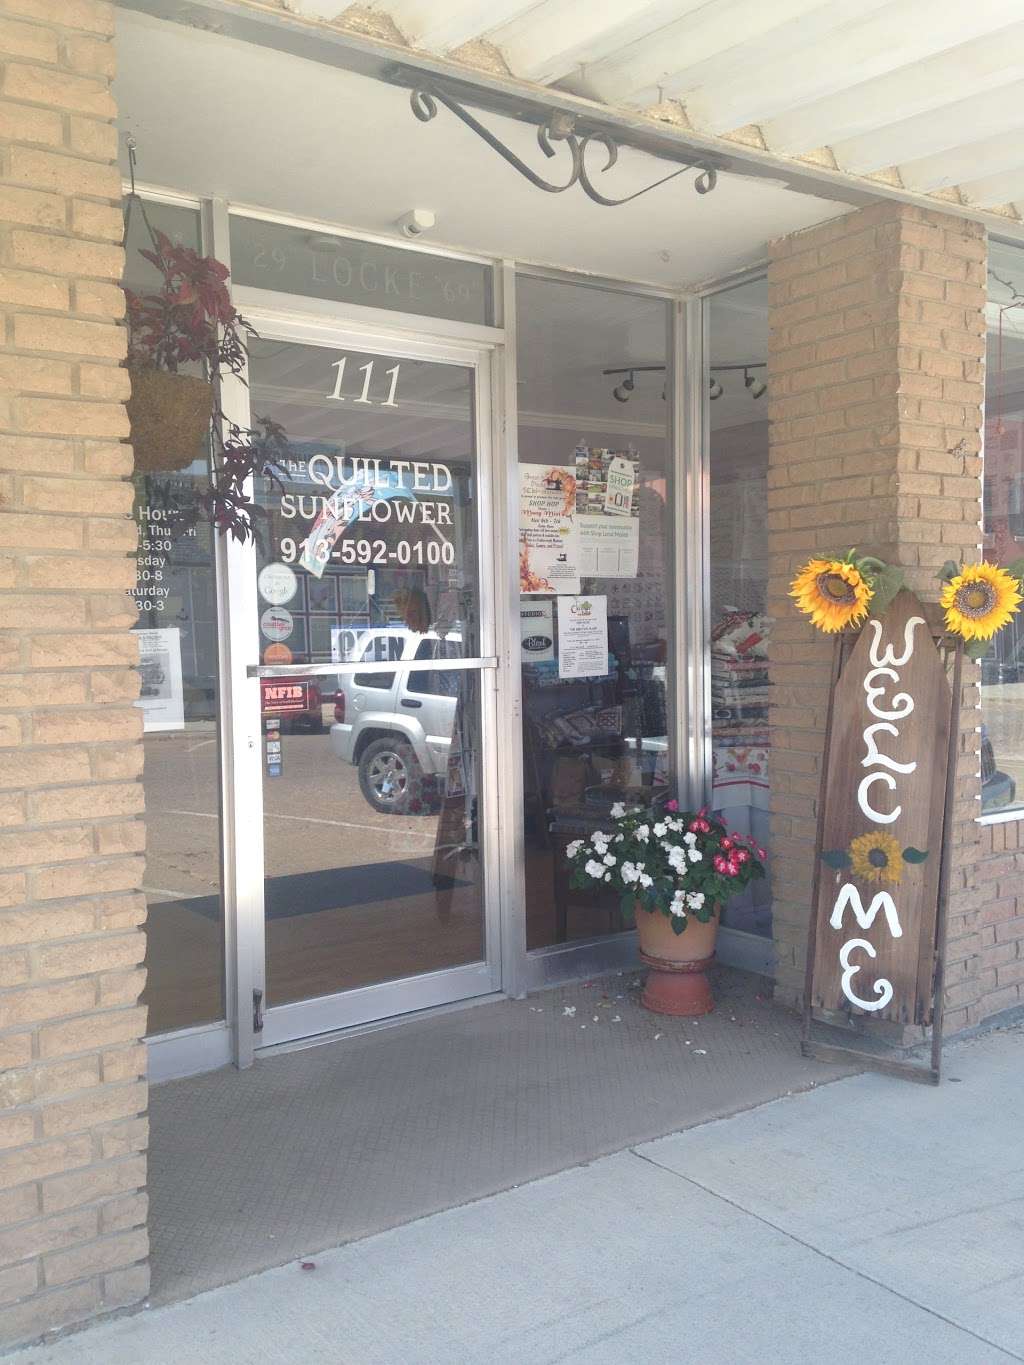 The Quilted Sunflower | 111 S Main St, Spring Hill, KS 66083 | Phone: (913) 592-0100